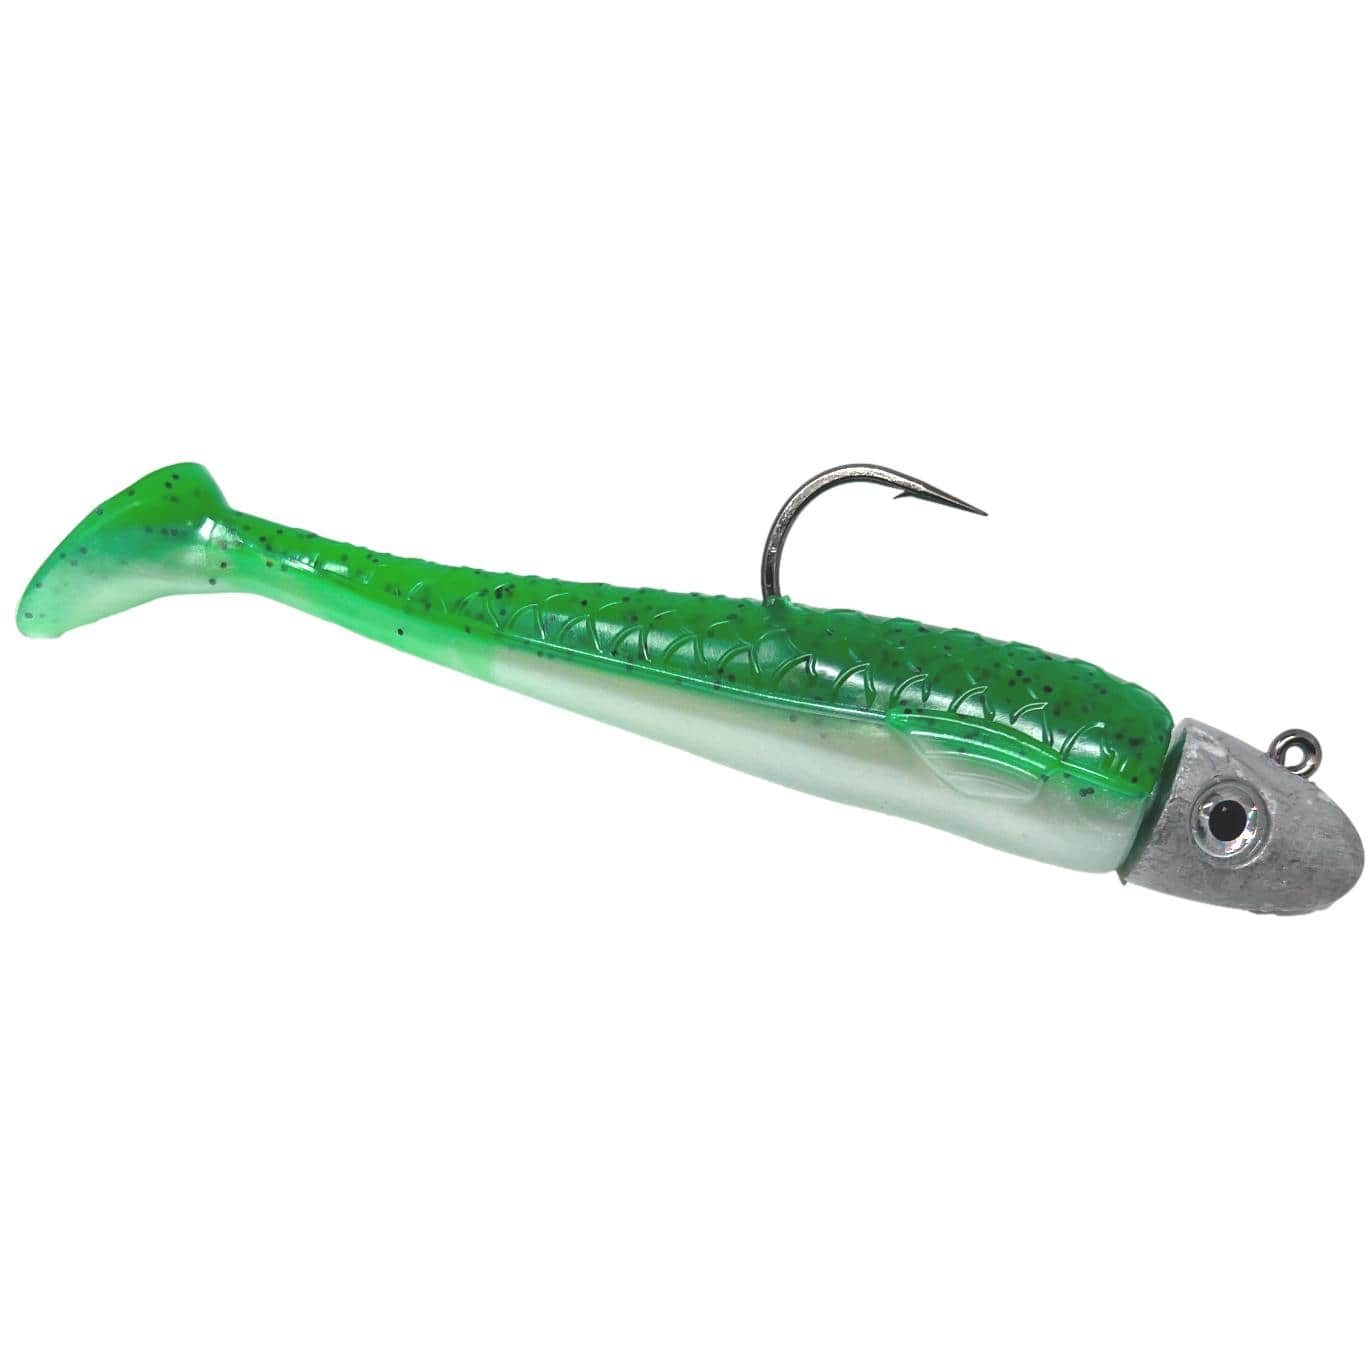 RonZ Z-Fin Original Series Rigged Sand Eel (5 and 6) - The